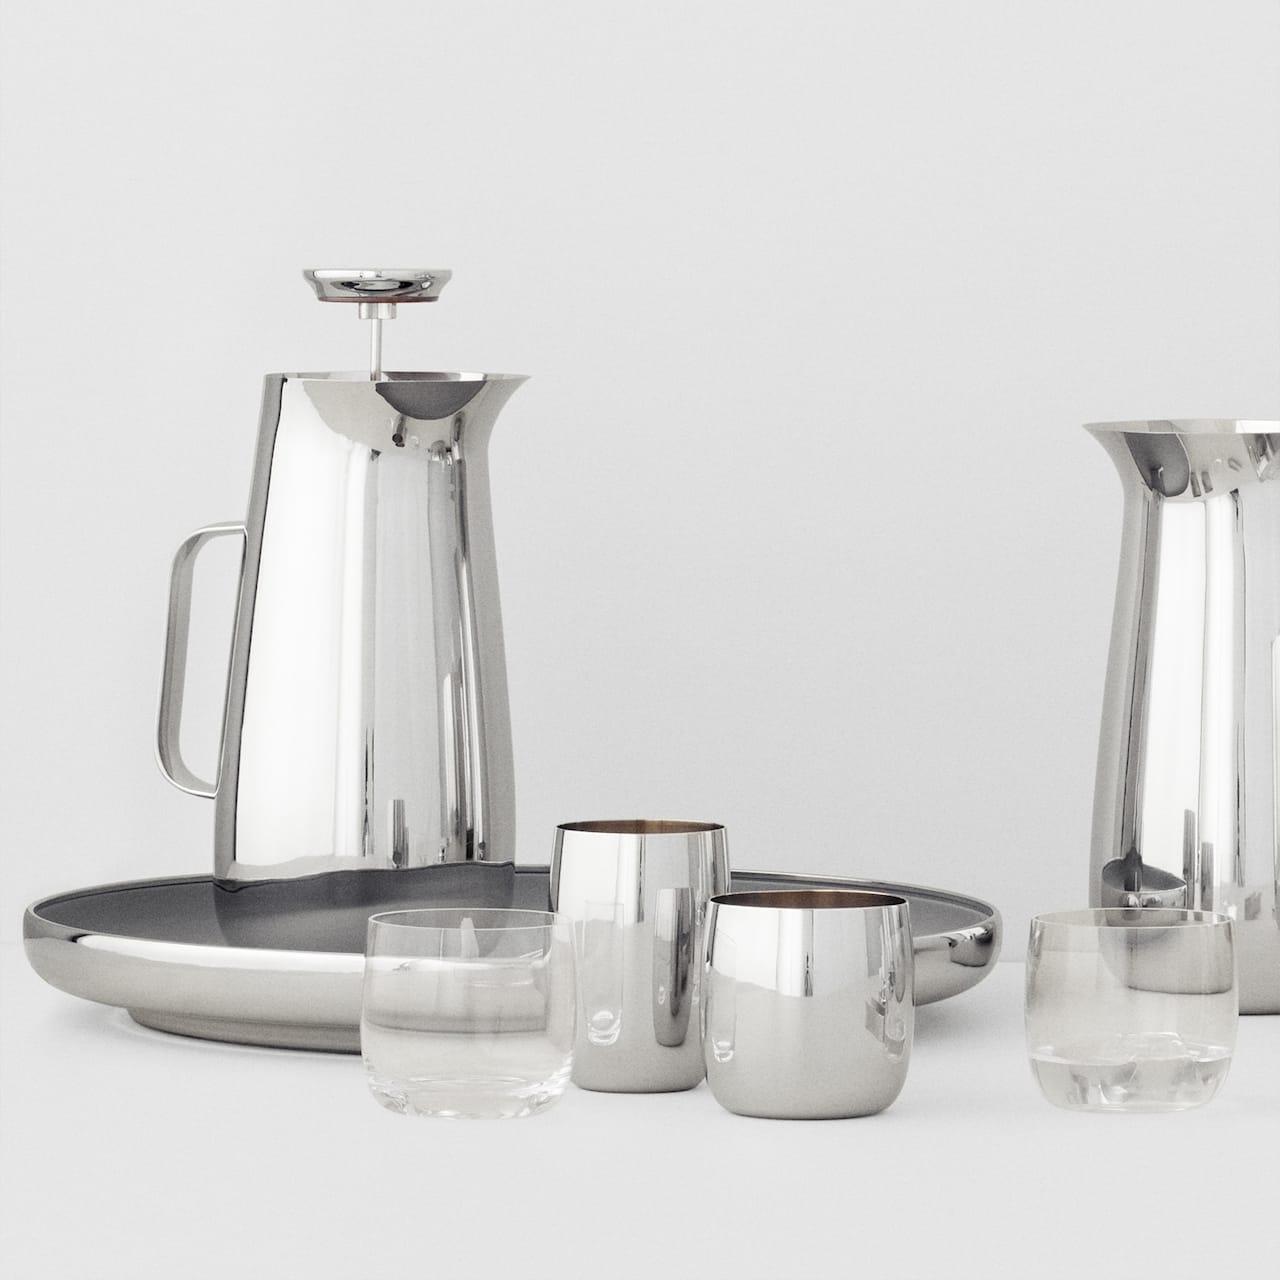 Norman Foster French Press 1 L